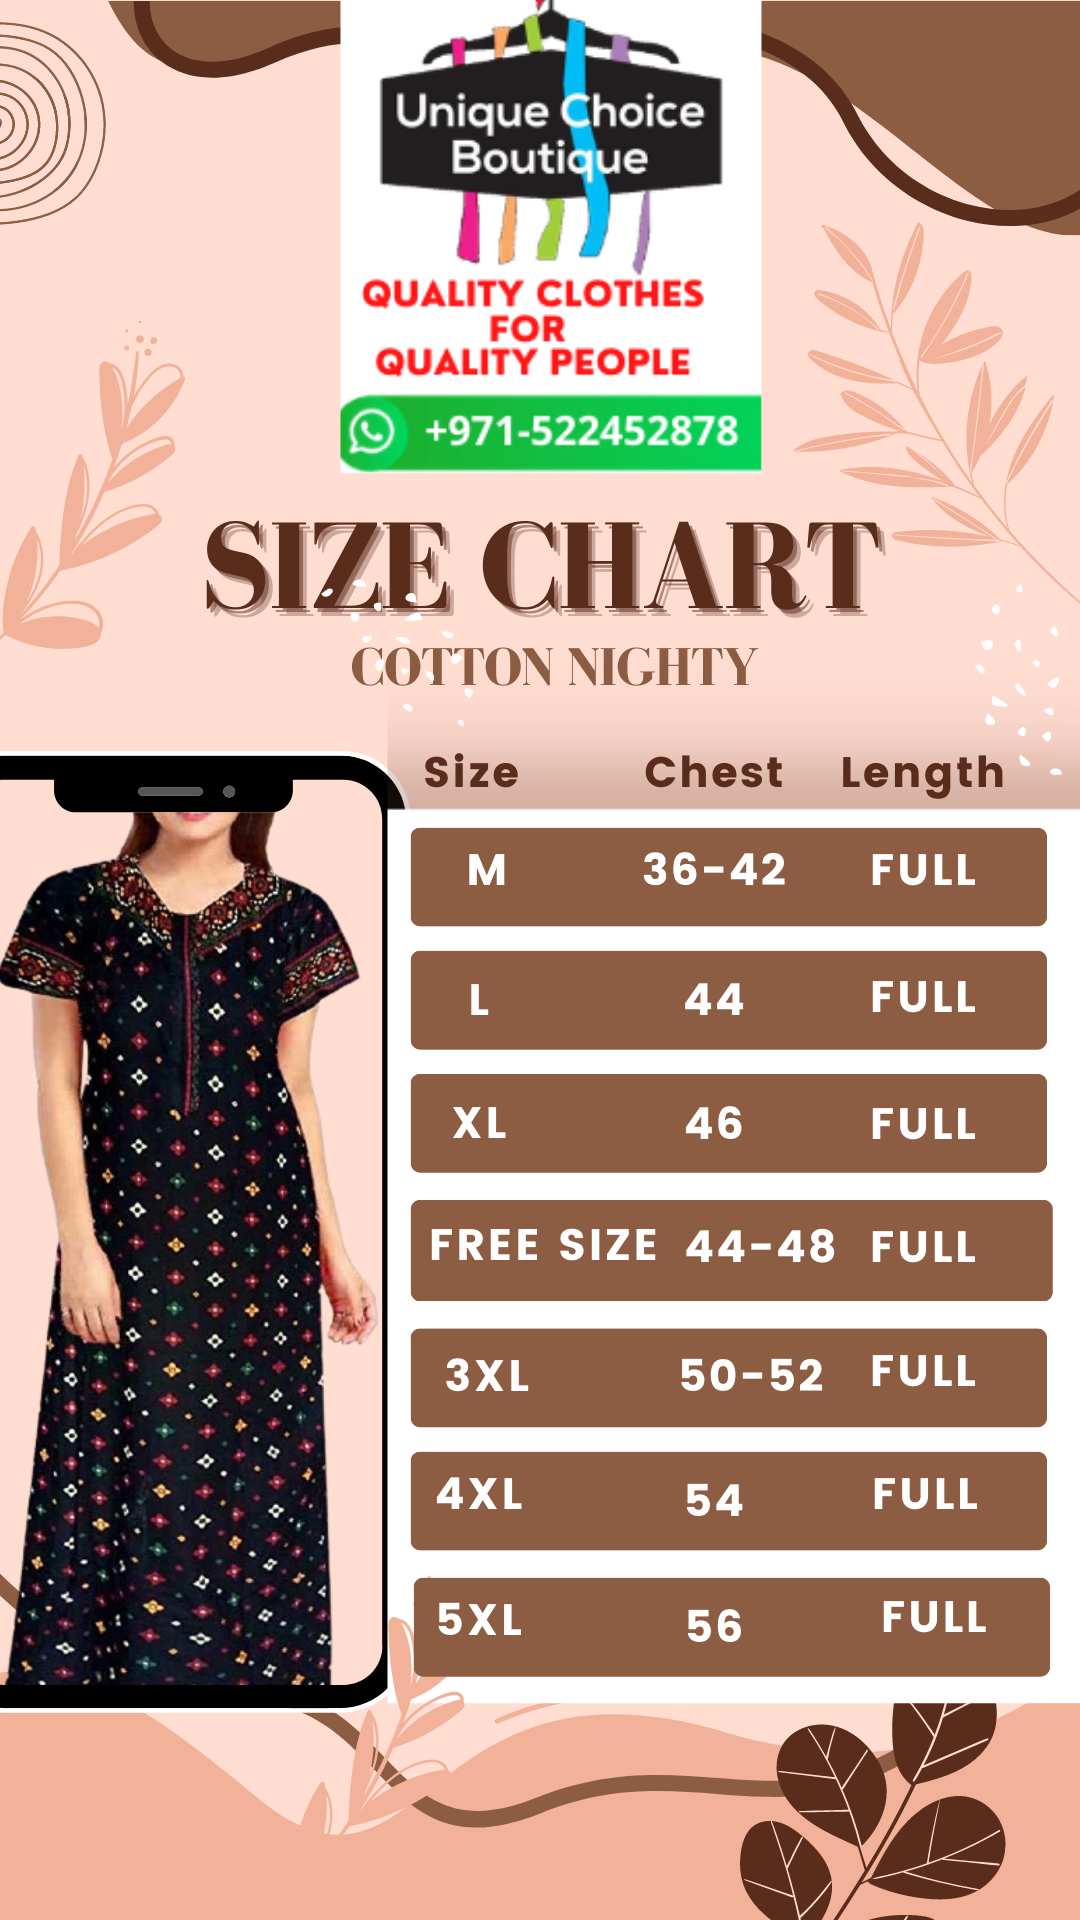 UNIQUE CHOICE Cotton Nighty, Night Gown-Black with yellow print-XXL/ Free Size